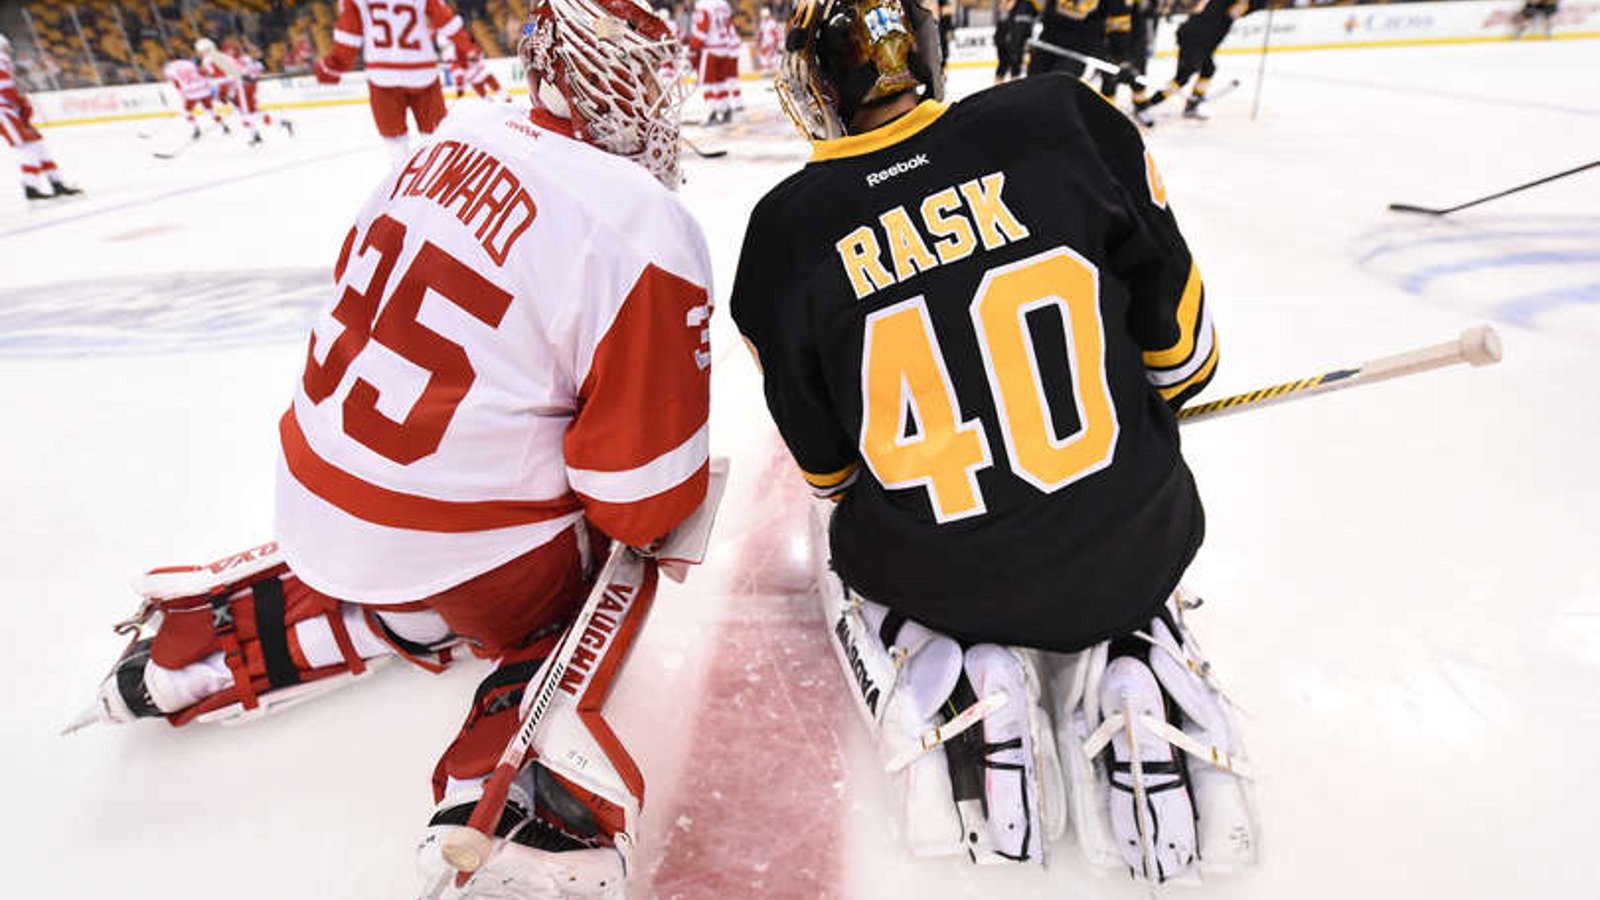 Bruins host the Red Wings